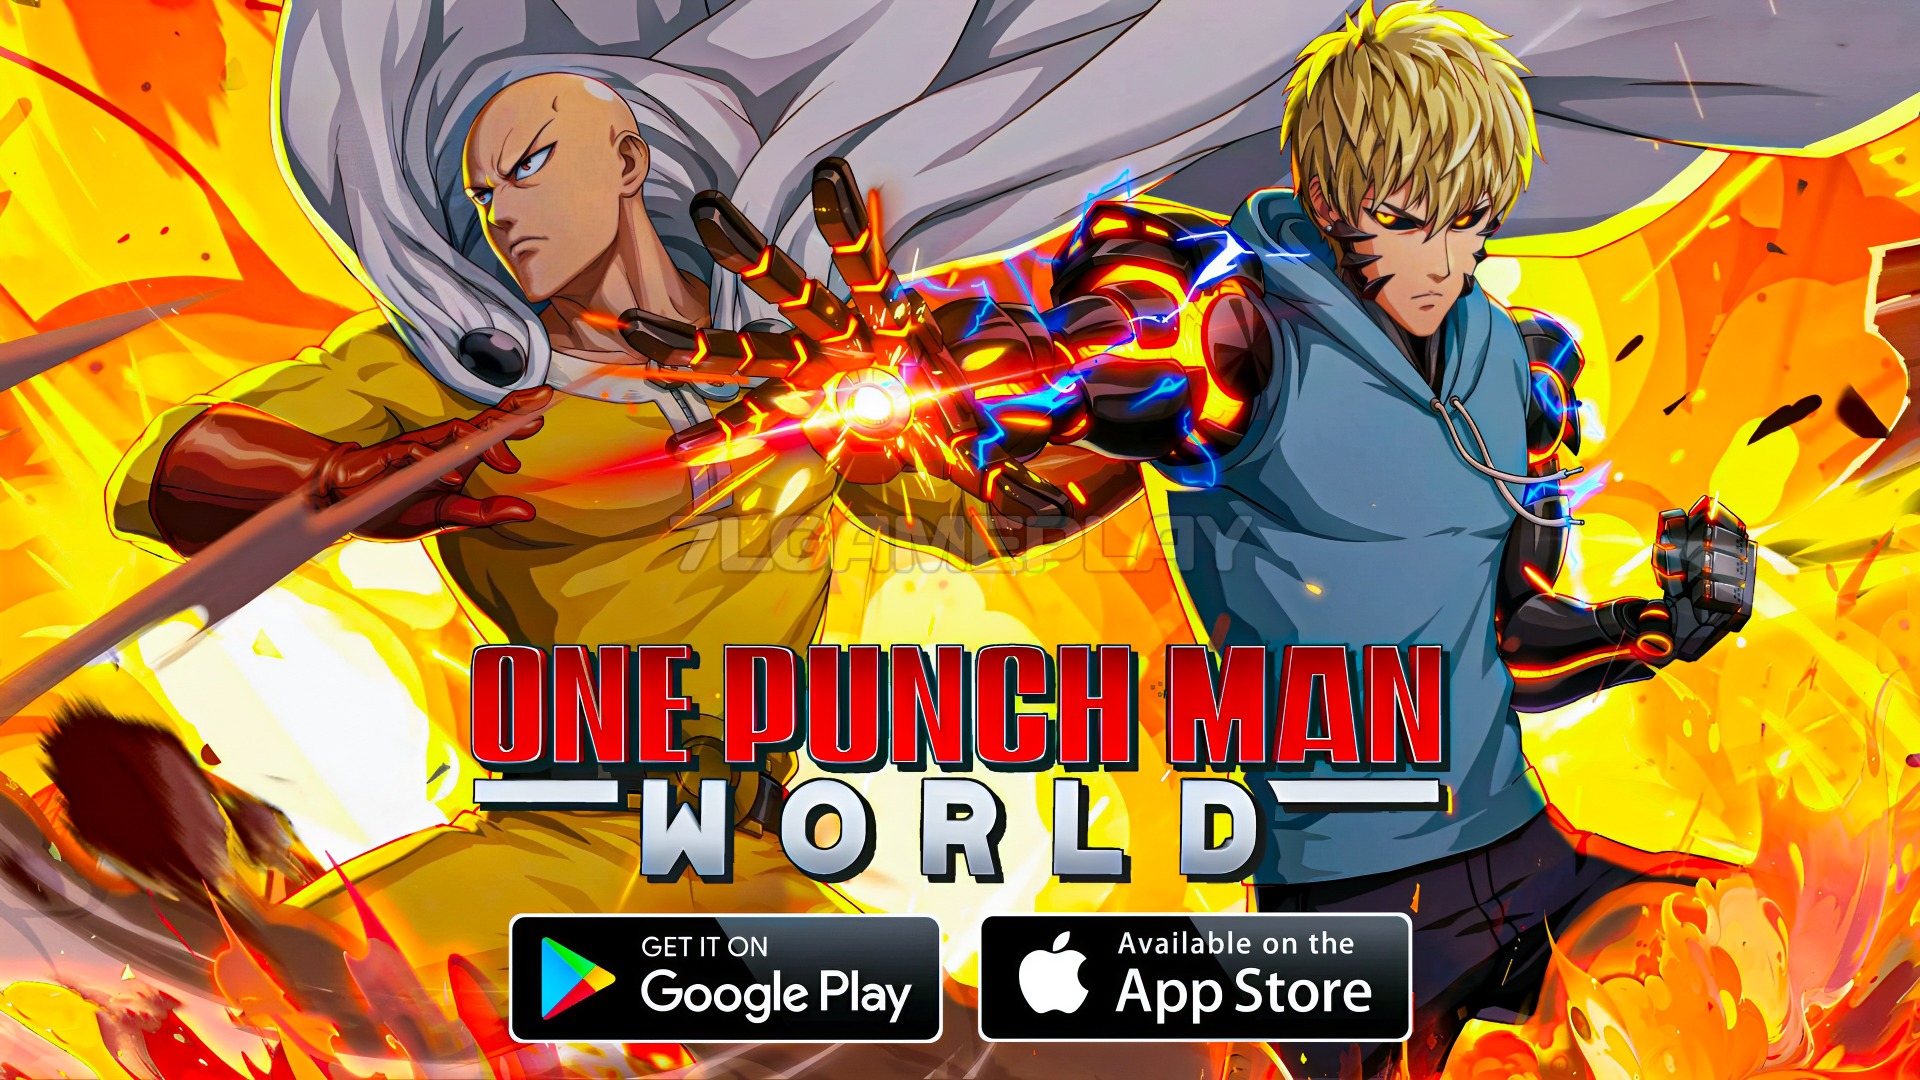 ONE PUNCH MAN: WORLD - Apps on Google Play